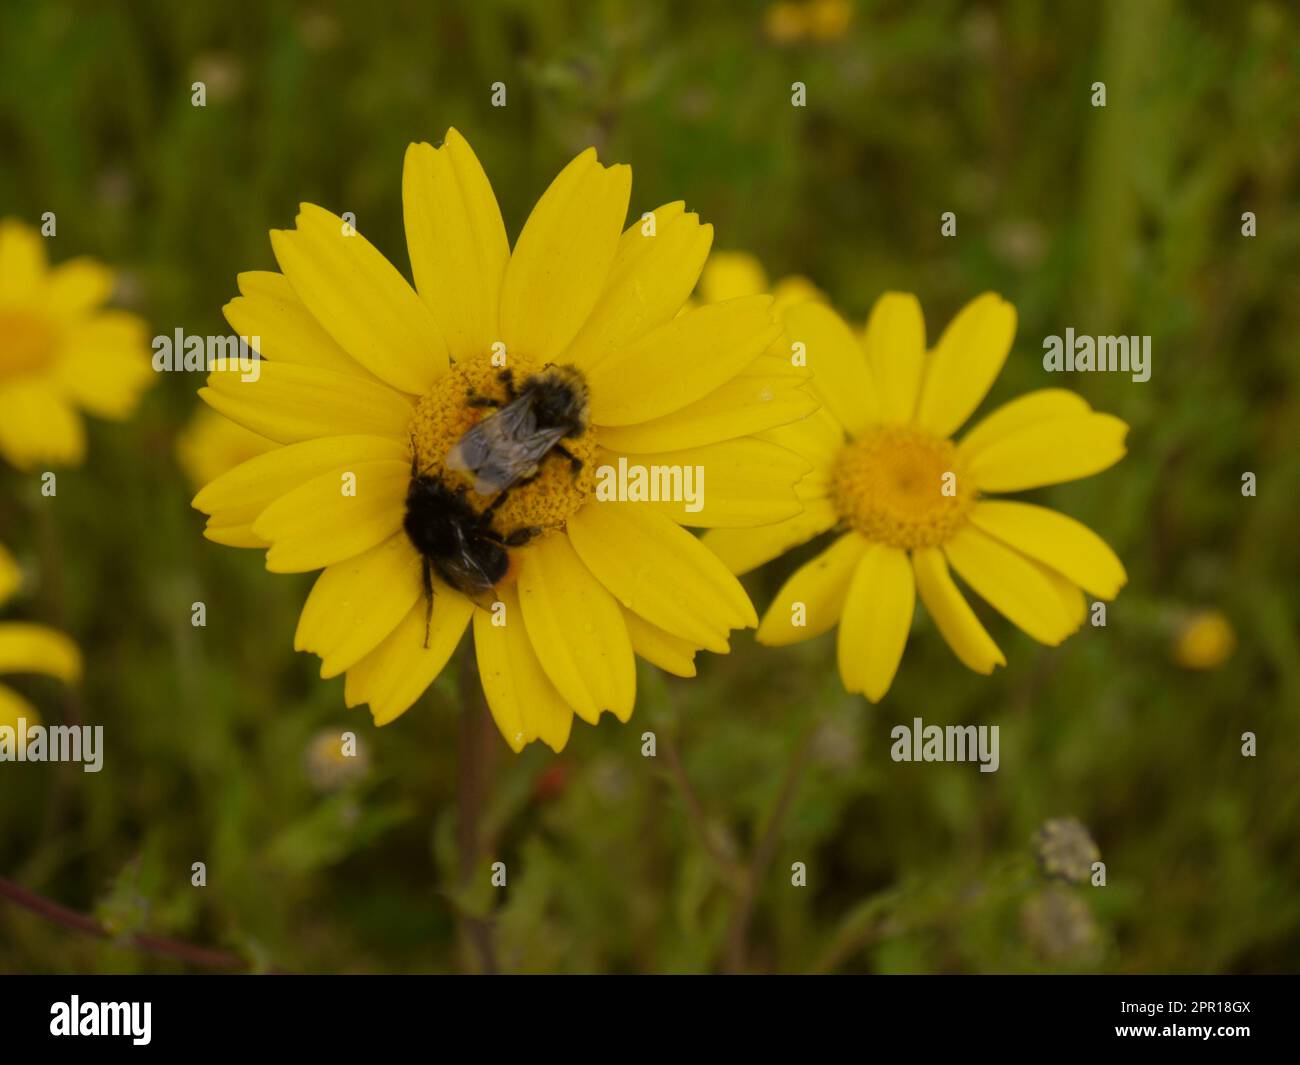 Two bees gather pollen from a corn marigold (Glebionis segetum) on the West Lawn at the Lost Gardens of Heligan - June 2019 Stock Photo